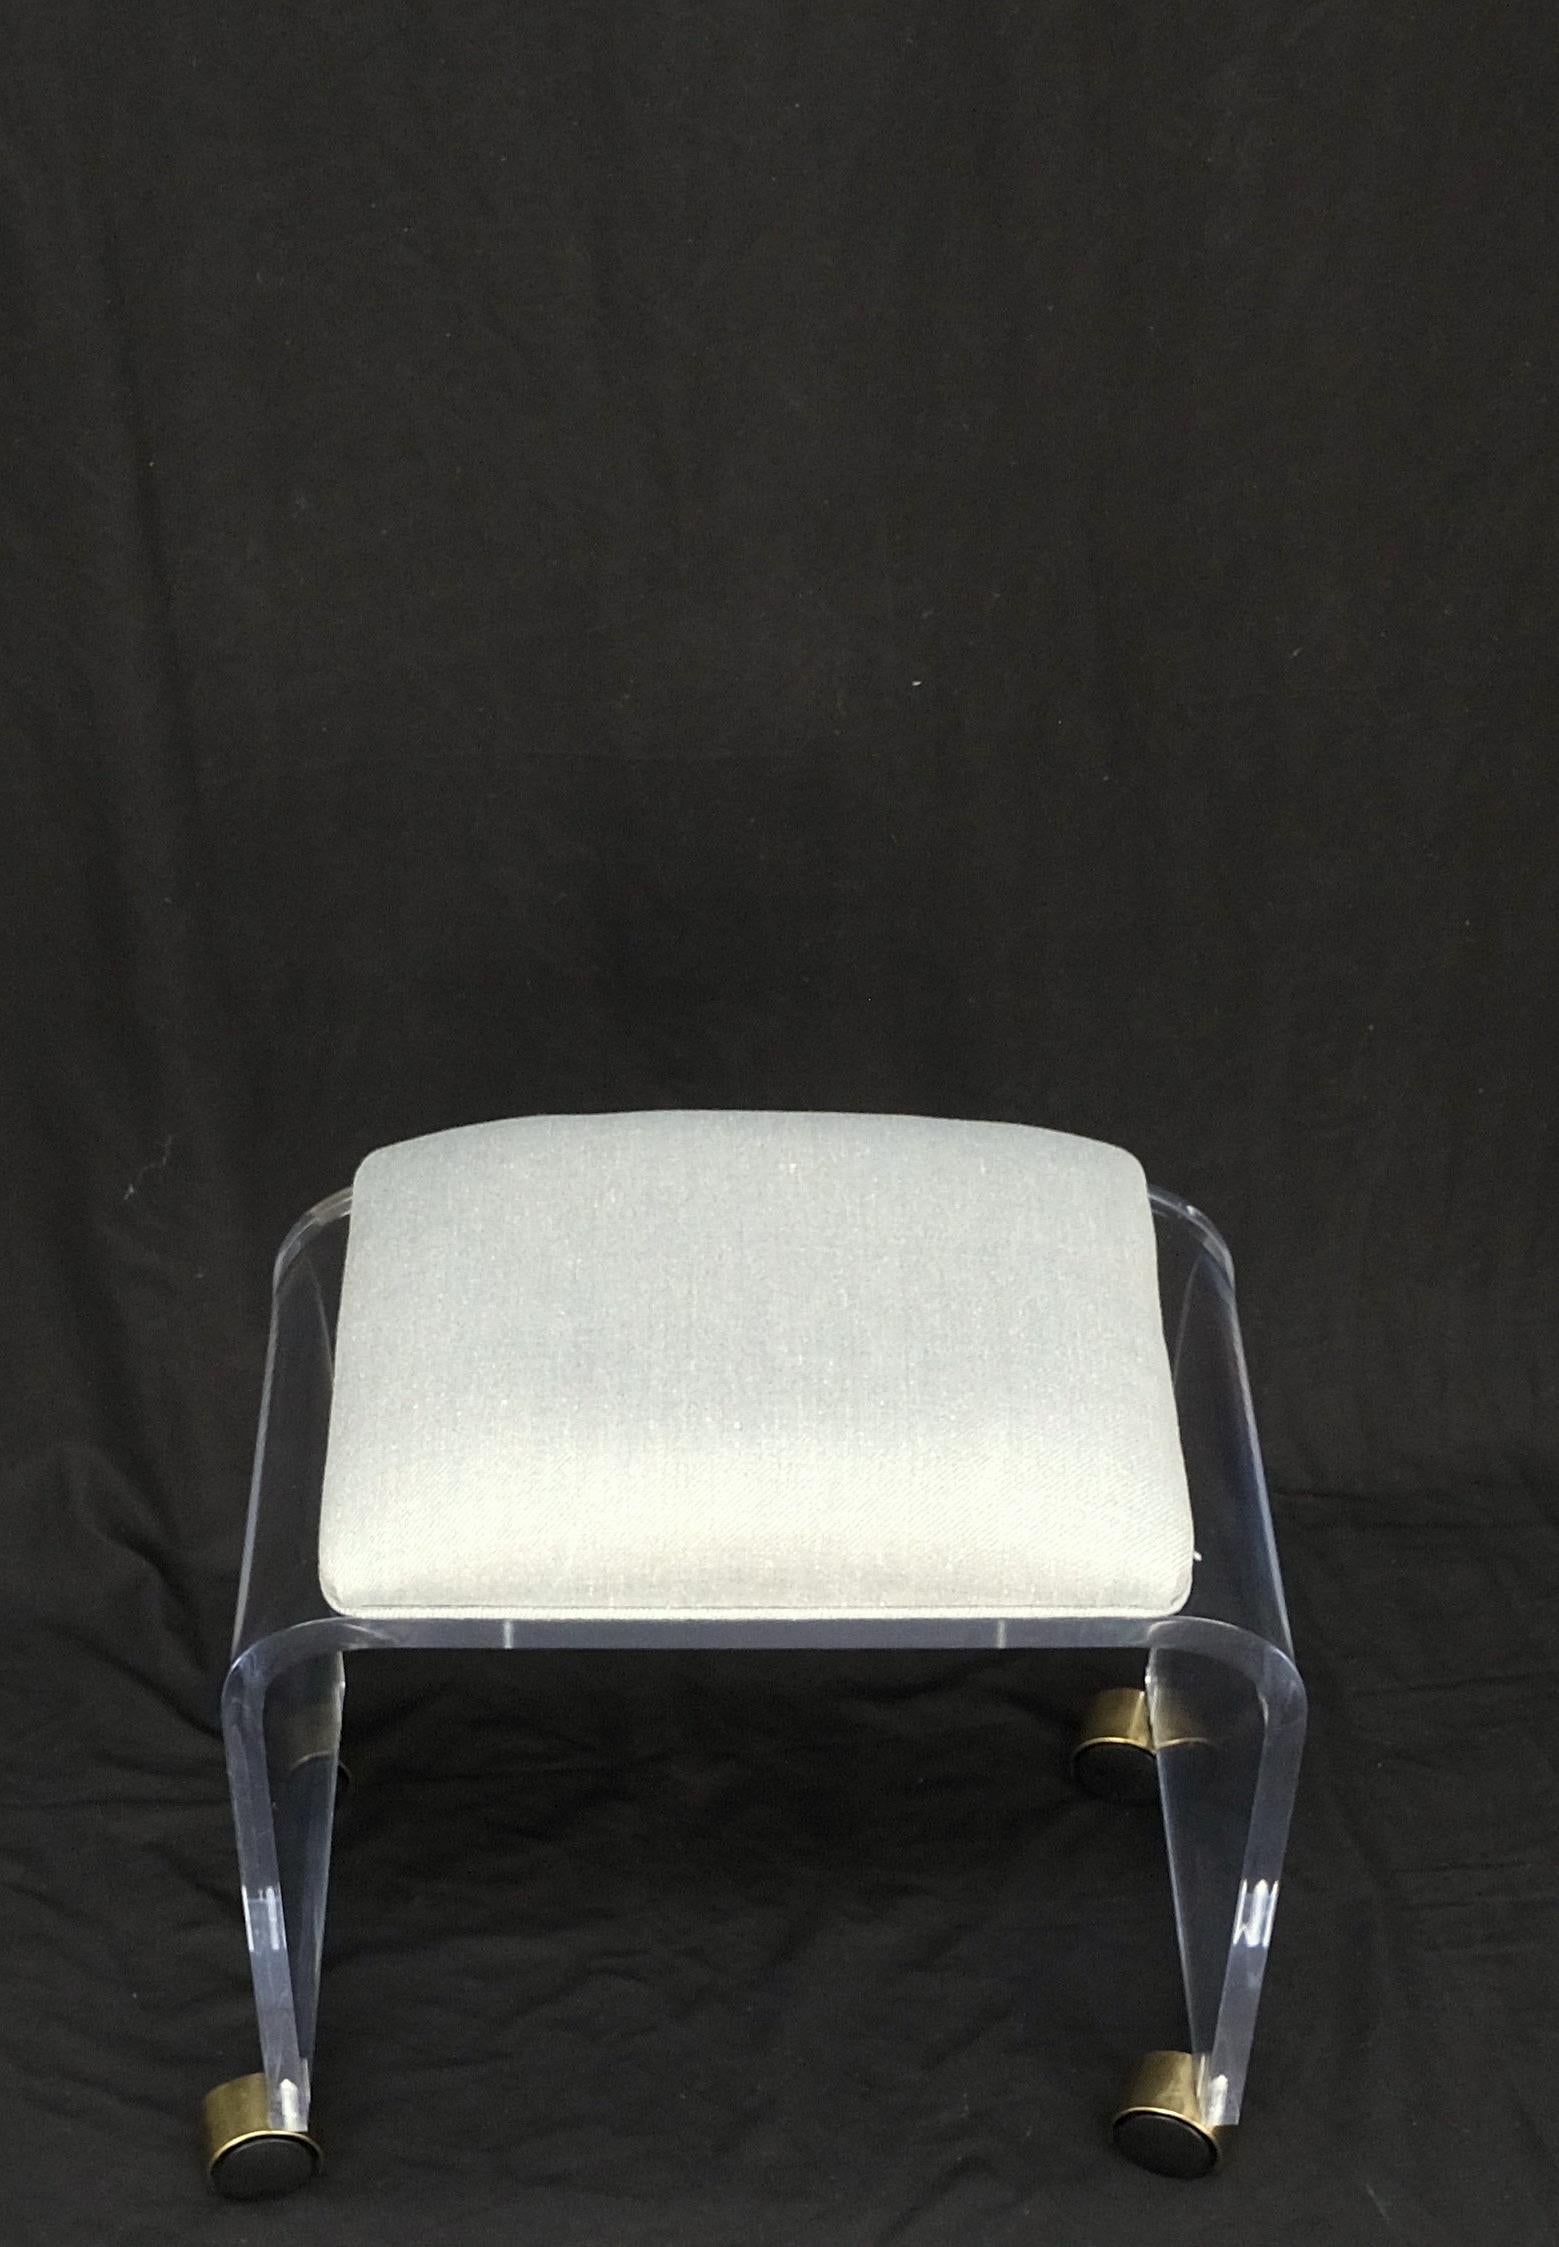 American Bent Lucite Mid-Century Modern New Upholstery Piano Window Hall Bench on Casters